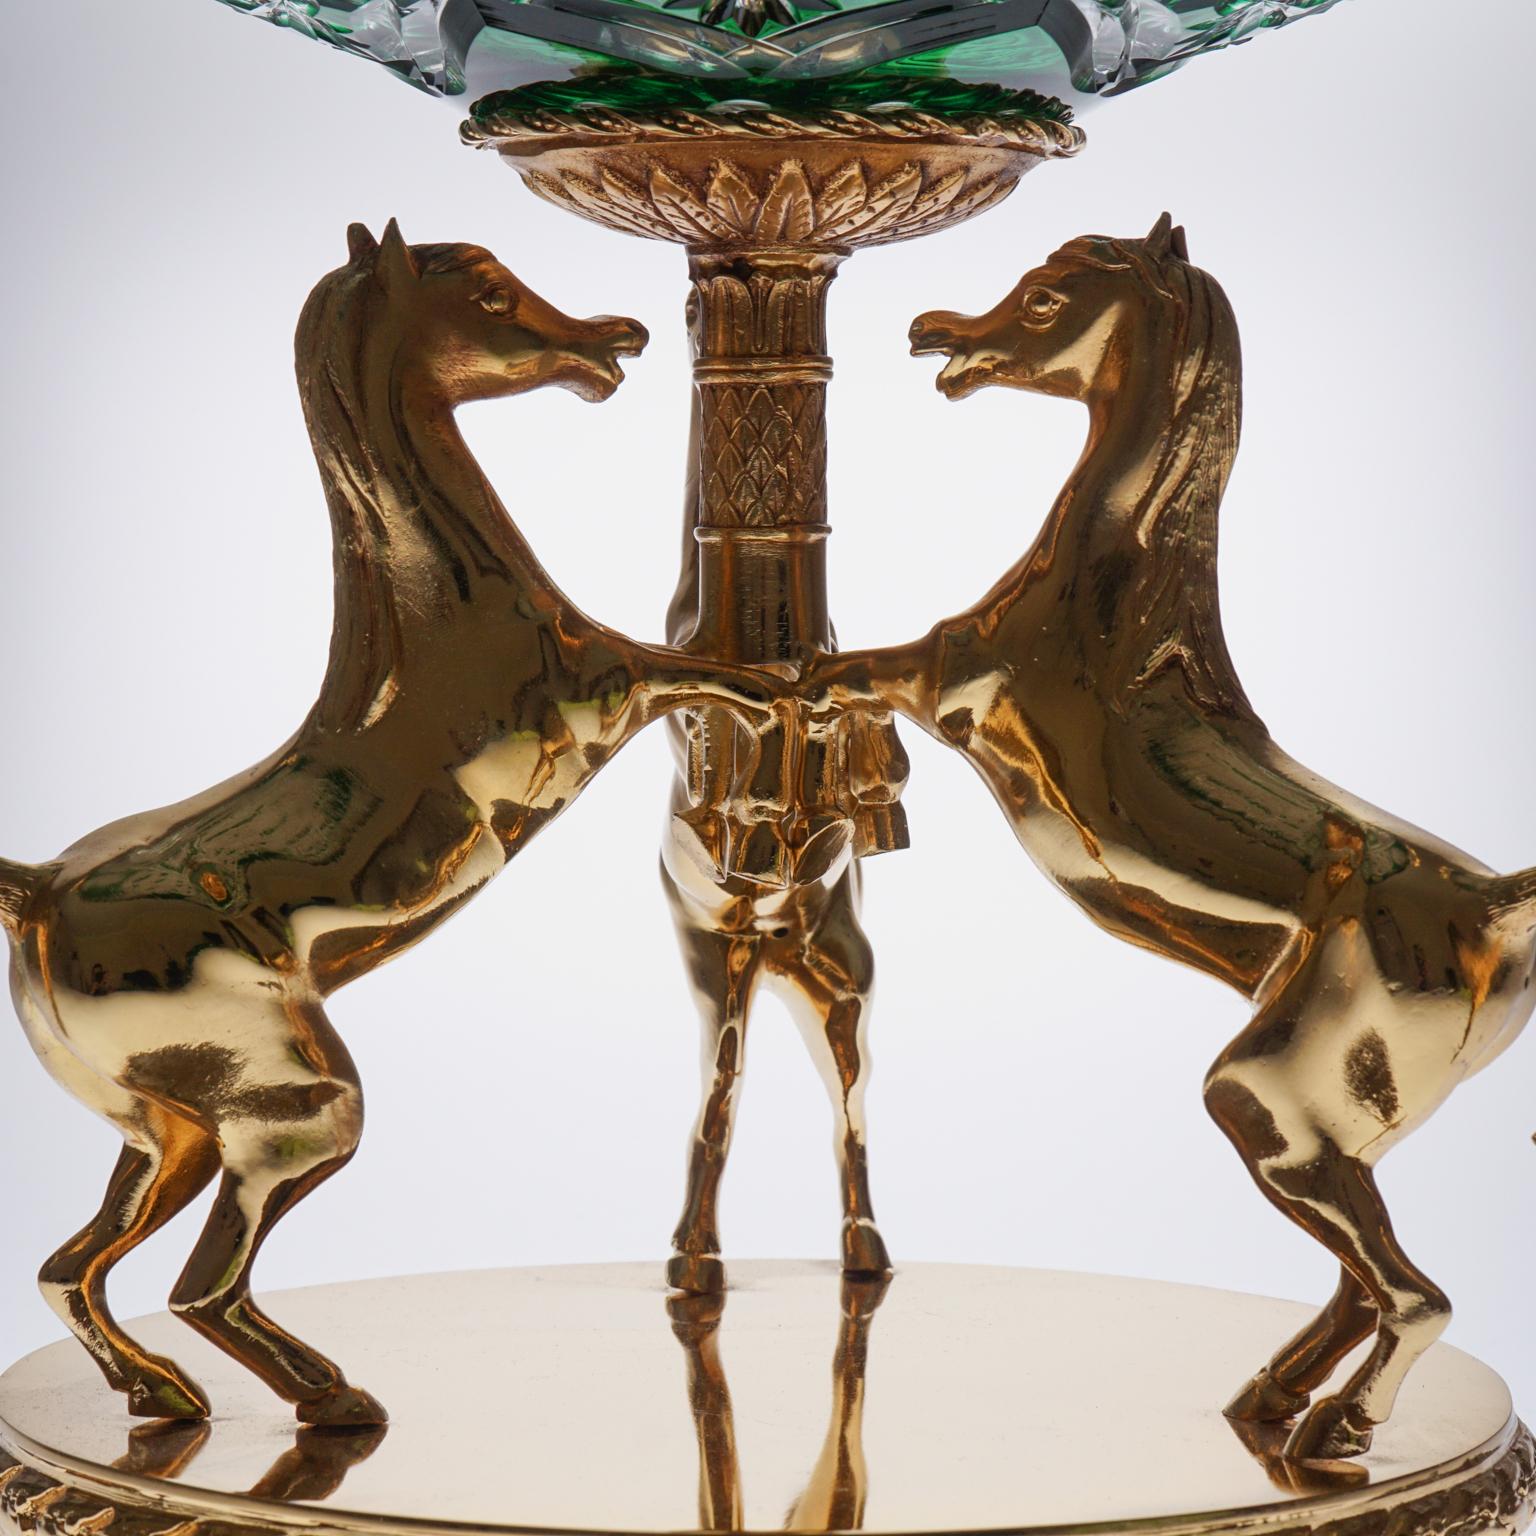 Other Green Crystal Bowls or Vase with Bronze Covered 22-Carat Gold, Design Horses For Sale